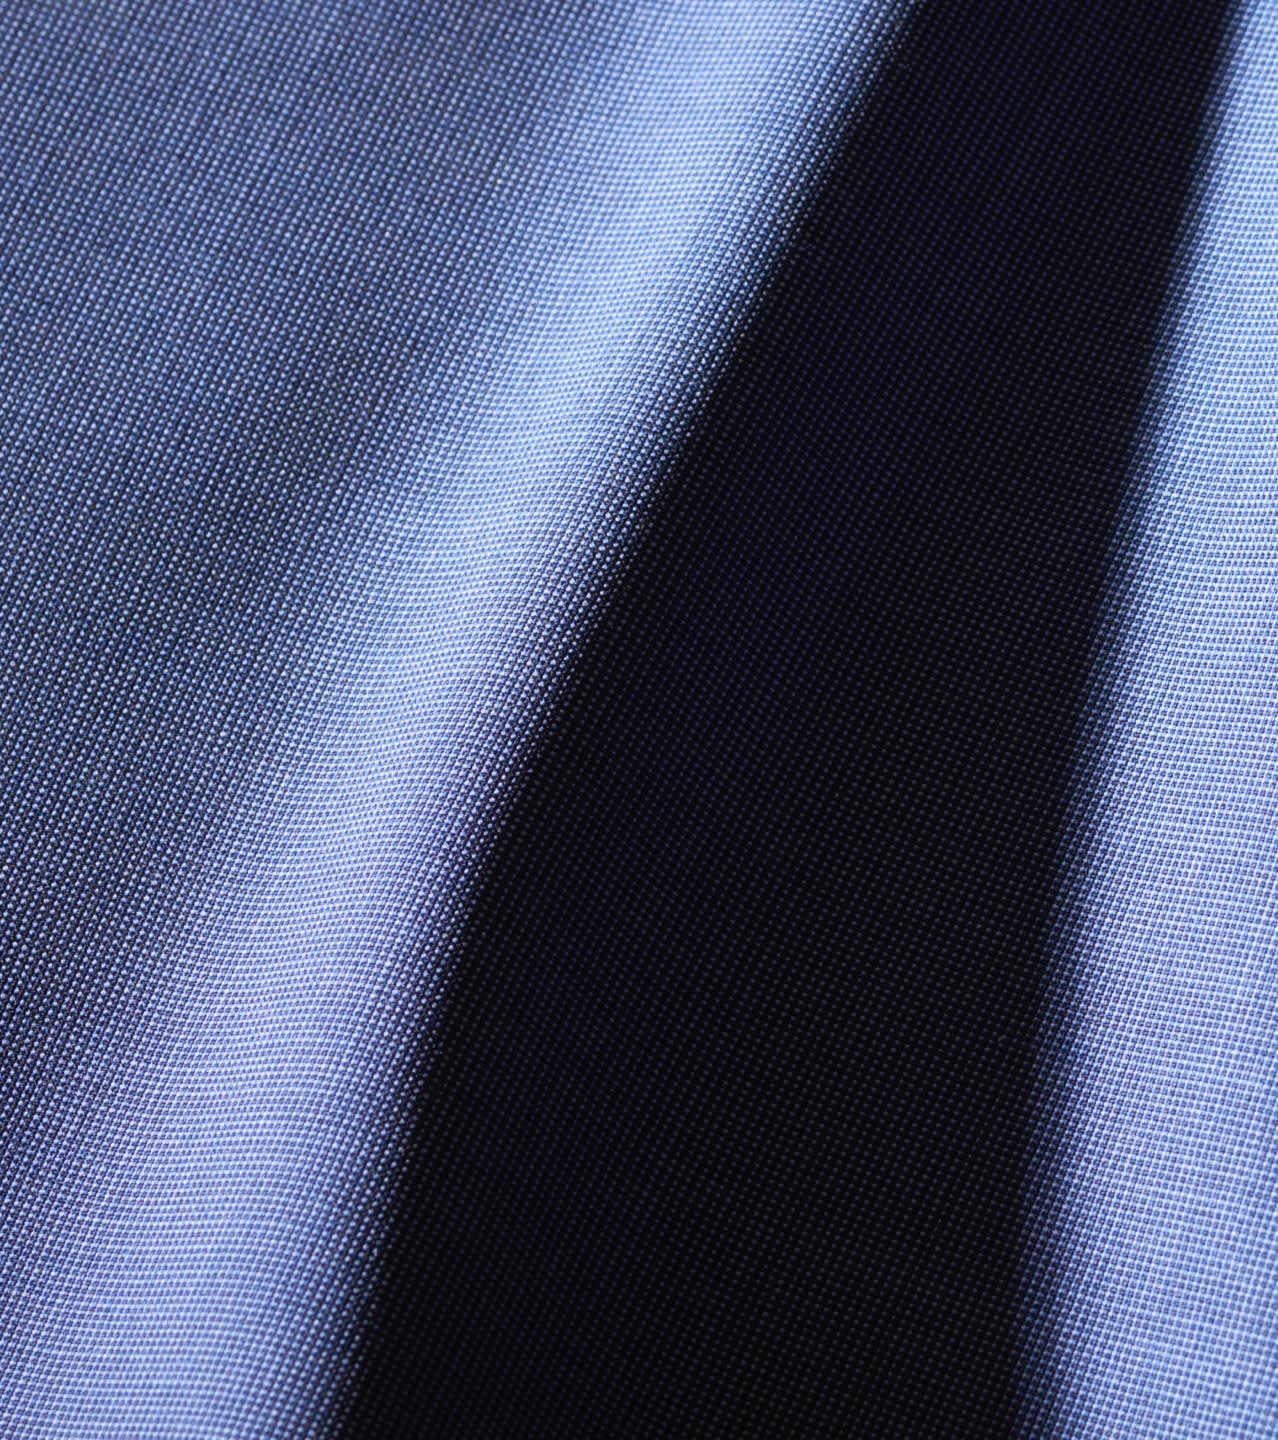 A light blue wool and silk fabric from the Brioni Bespoke selection